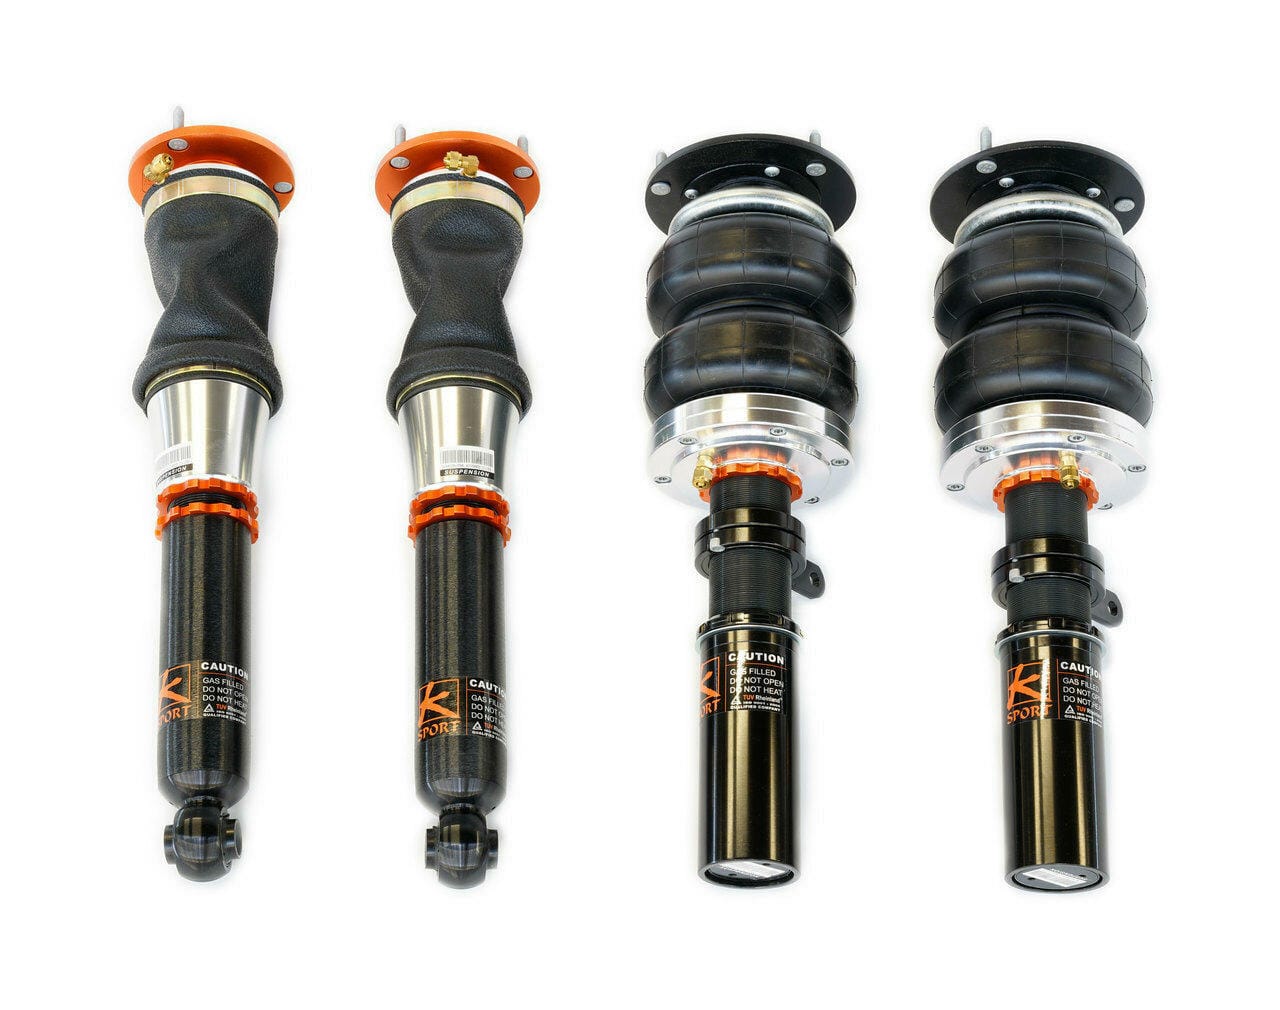 Ksport Airtech Air Suspension System (Struts Only) - 1987-1992 Toyota Supra (JZA70/MA70) CTY290-ASO